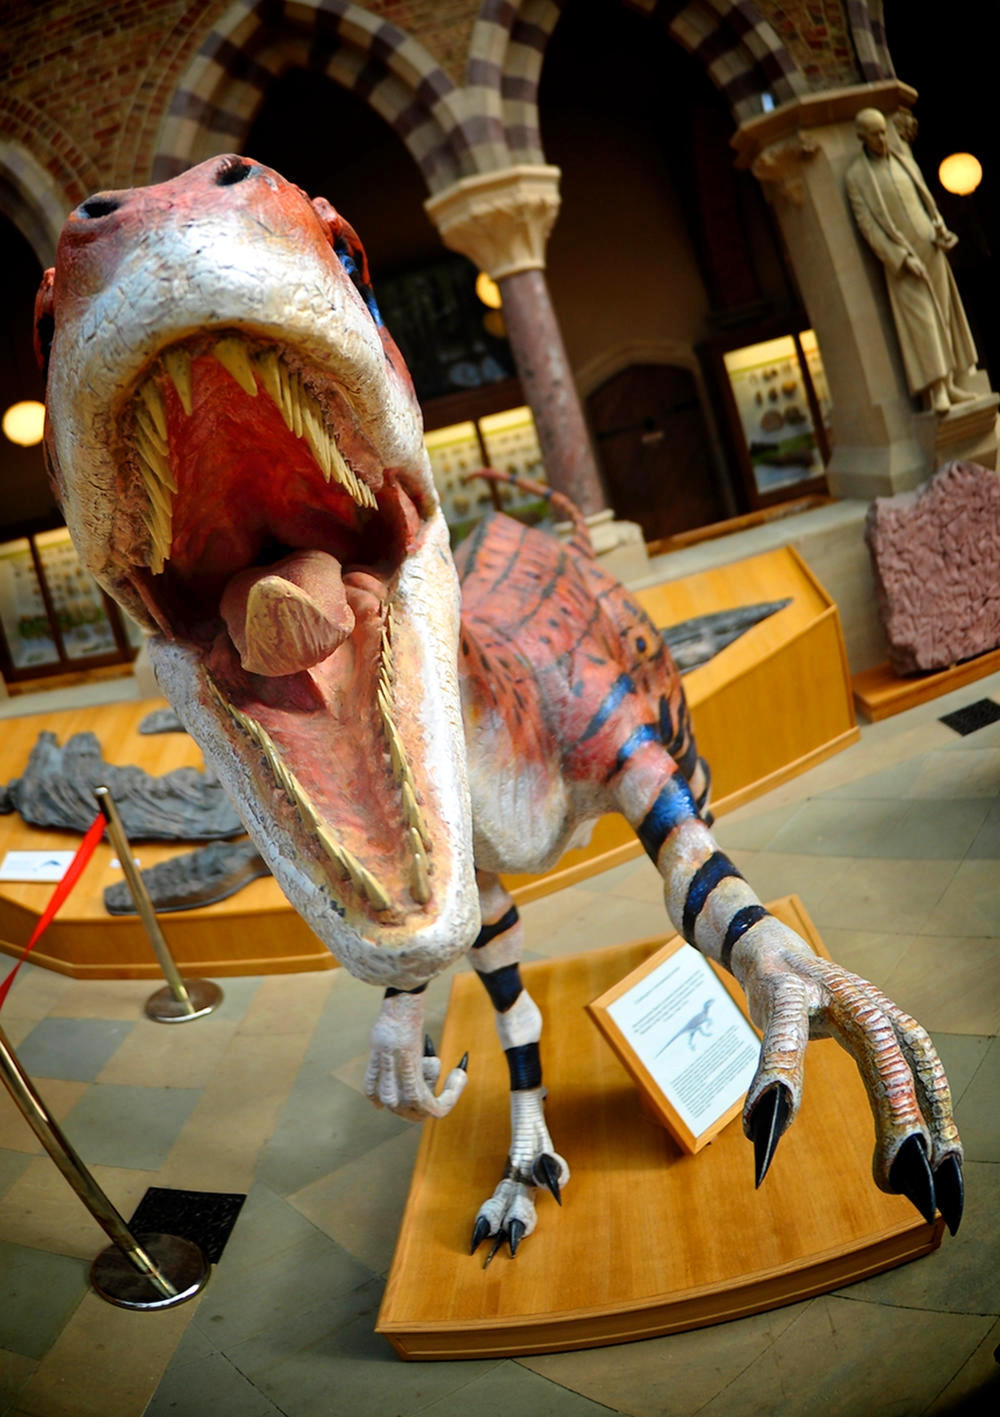 Velociraptor at Oxford's Natural History Museum. Credit IntoTh3Rainbow